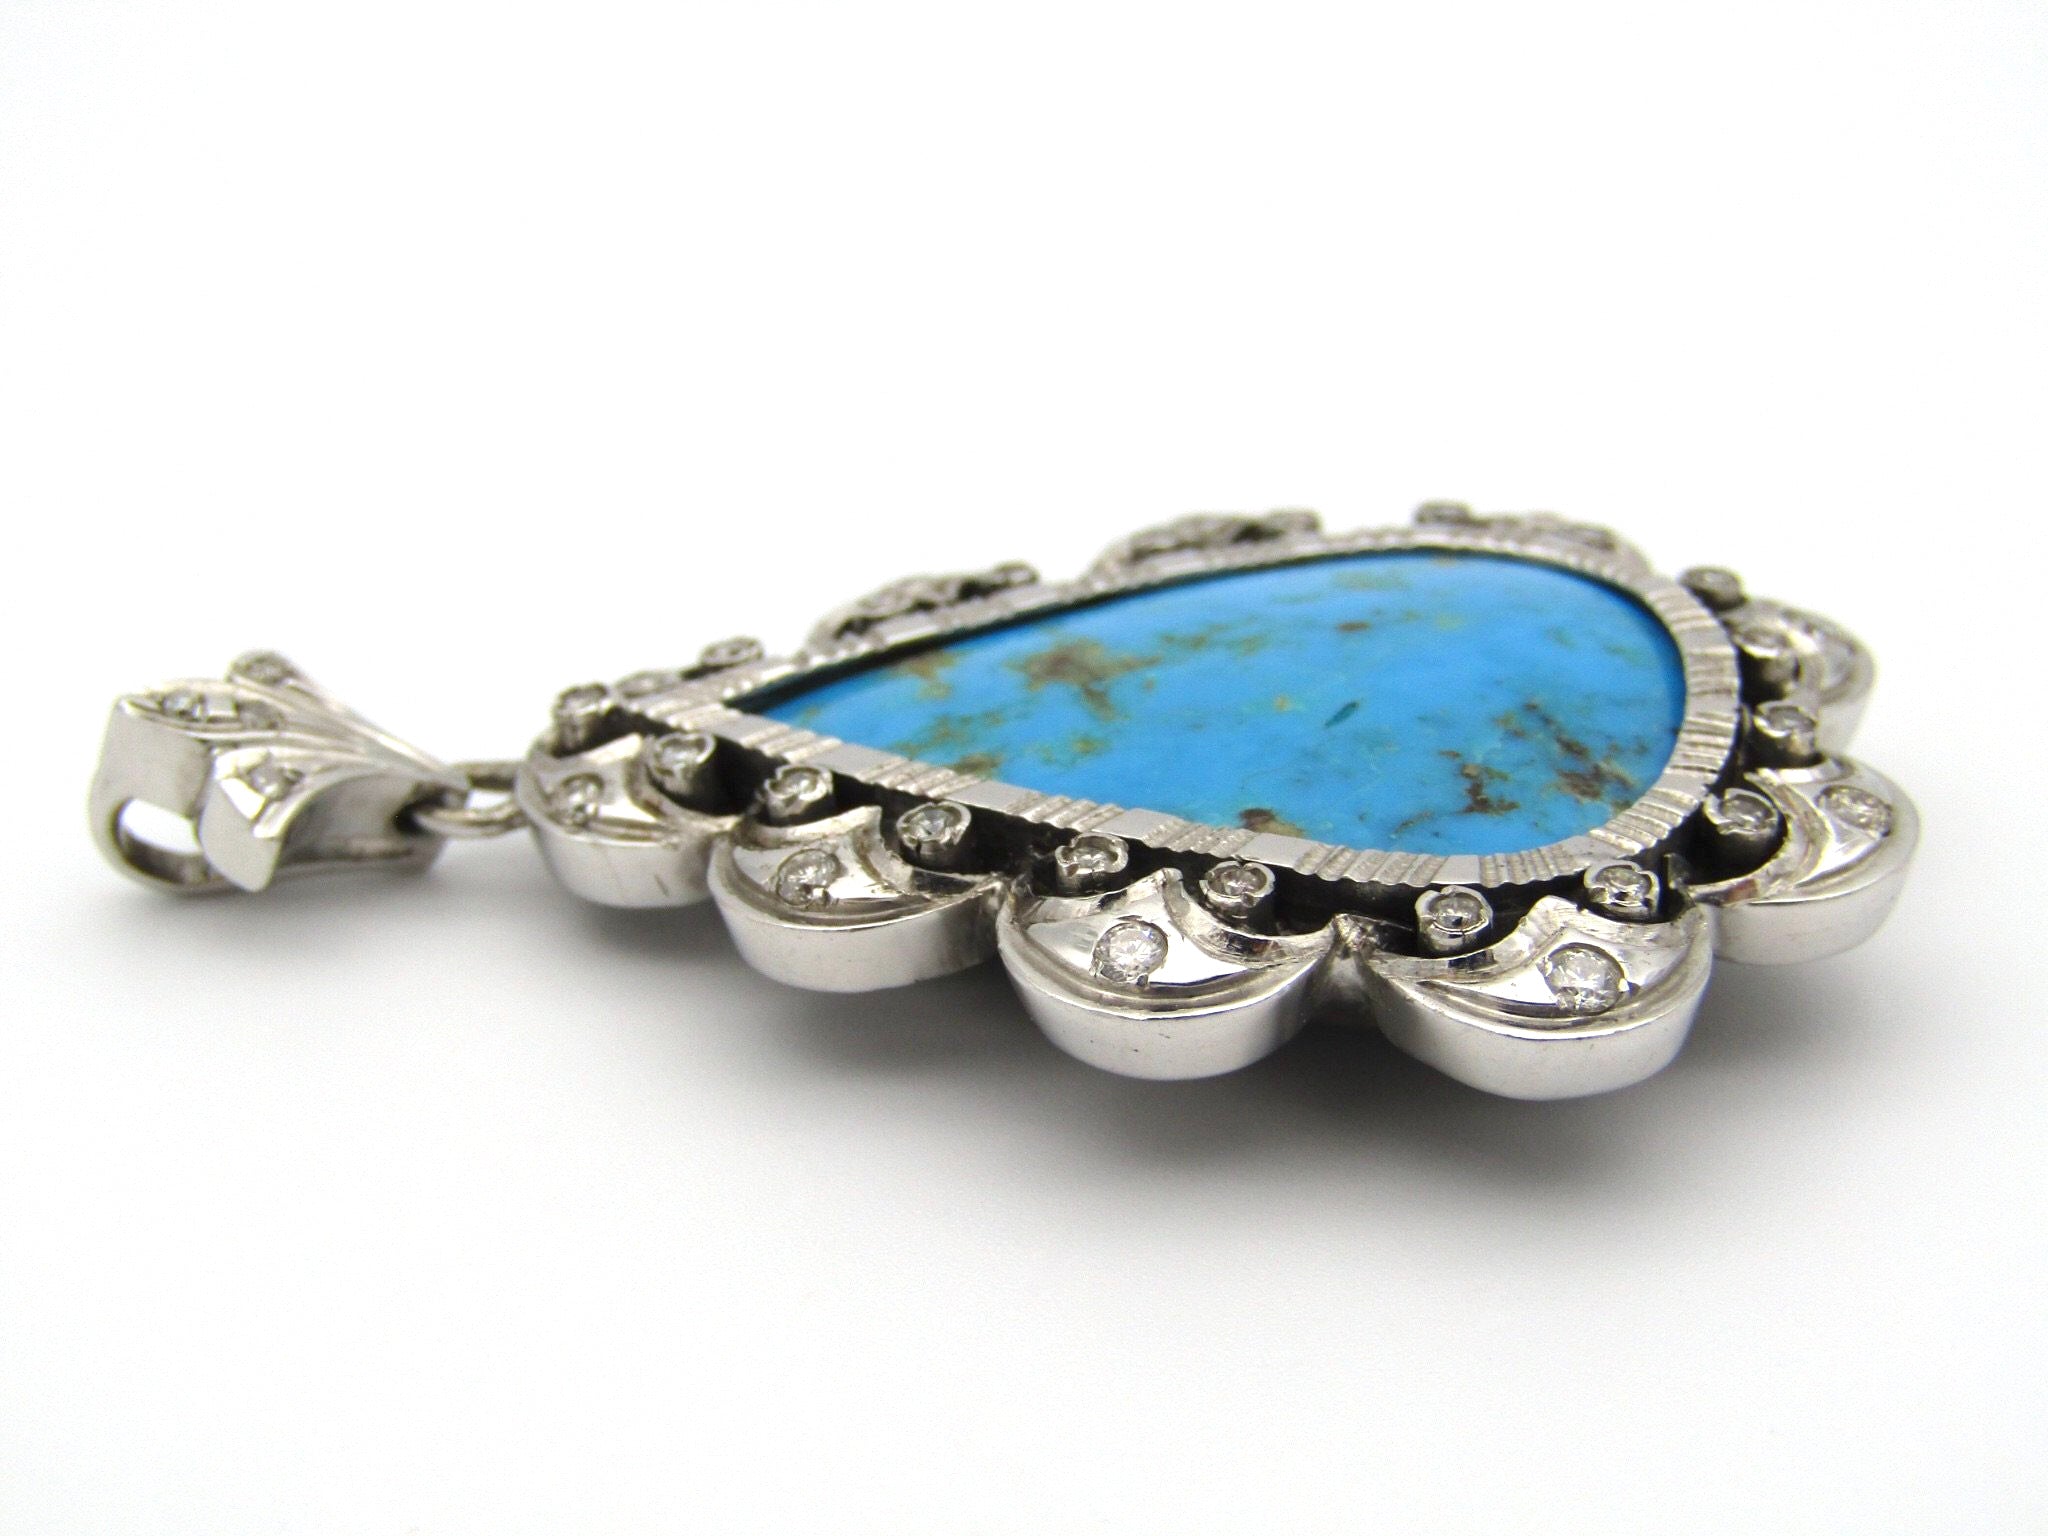 18kt white gold turquoise and diamond pendant.